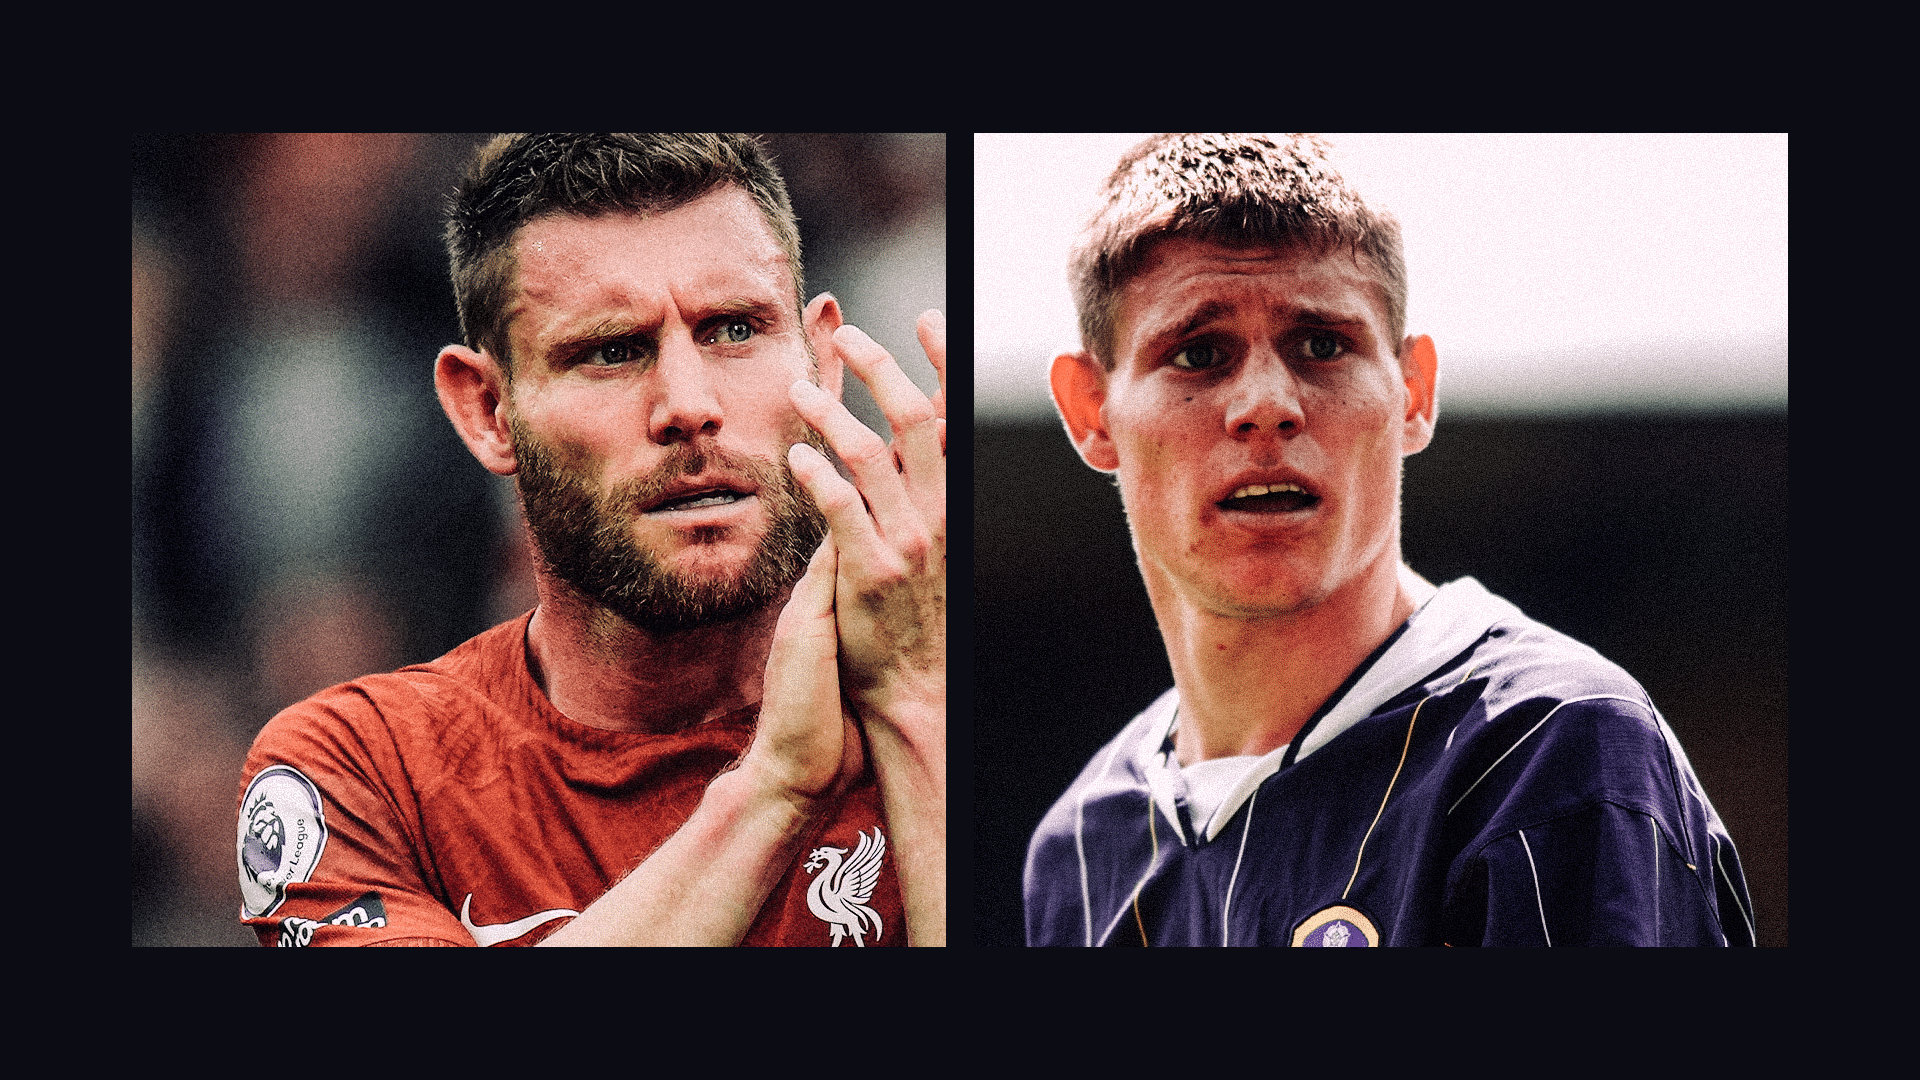 Two photos of James Milner next to each other: on the right, the spotty teenager in a Leeds shirt; on the left the bearded veteran at Liverpool